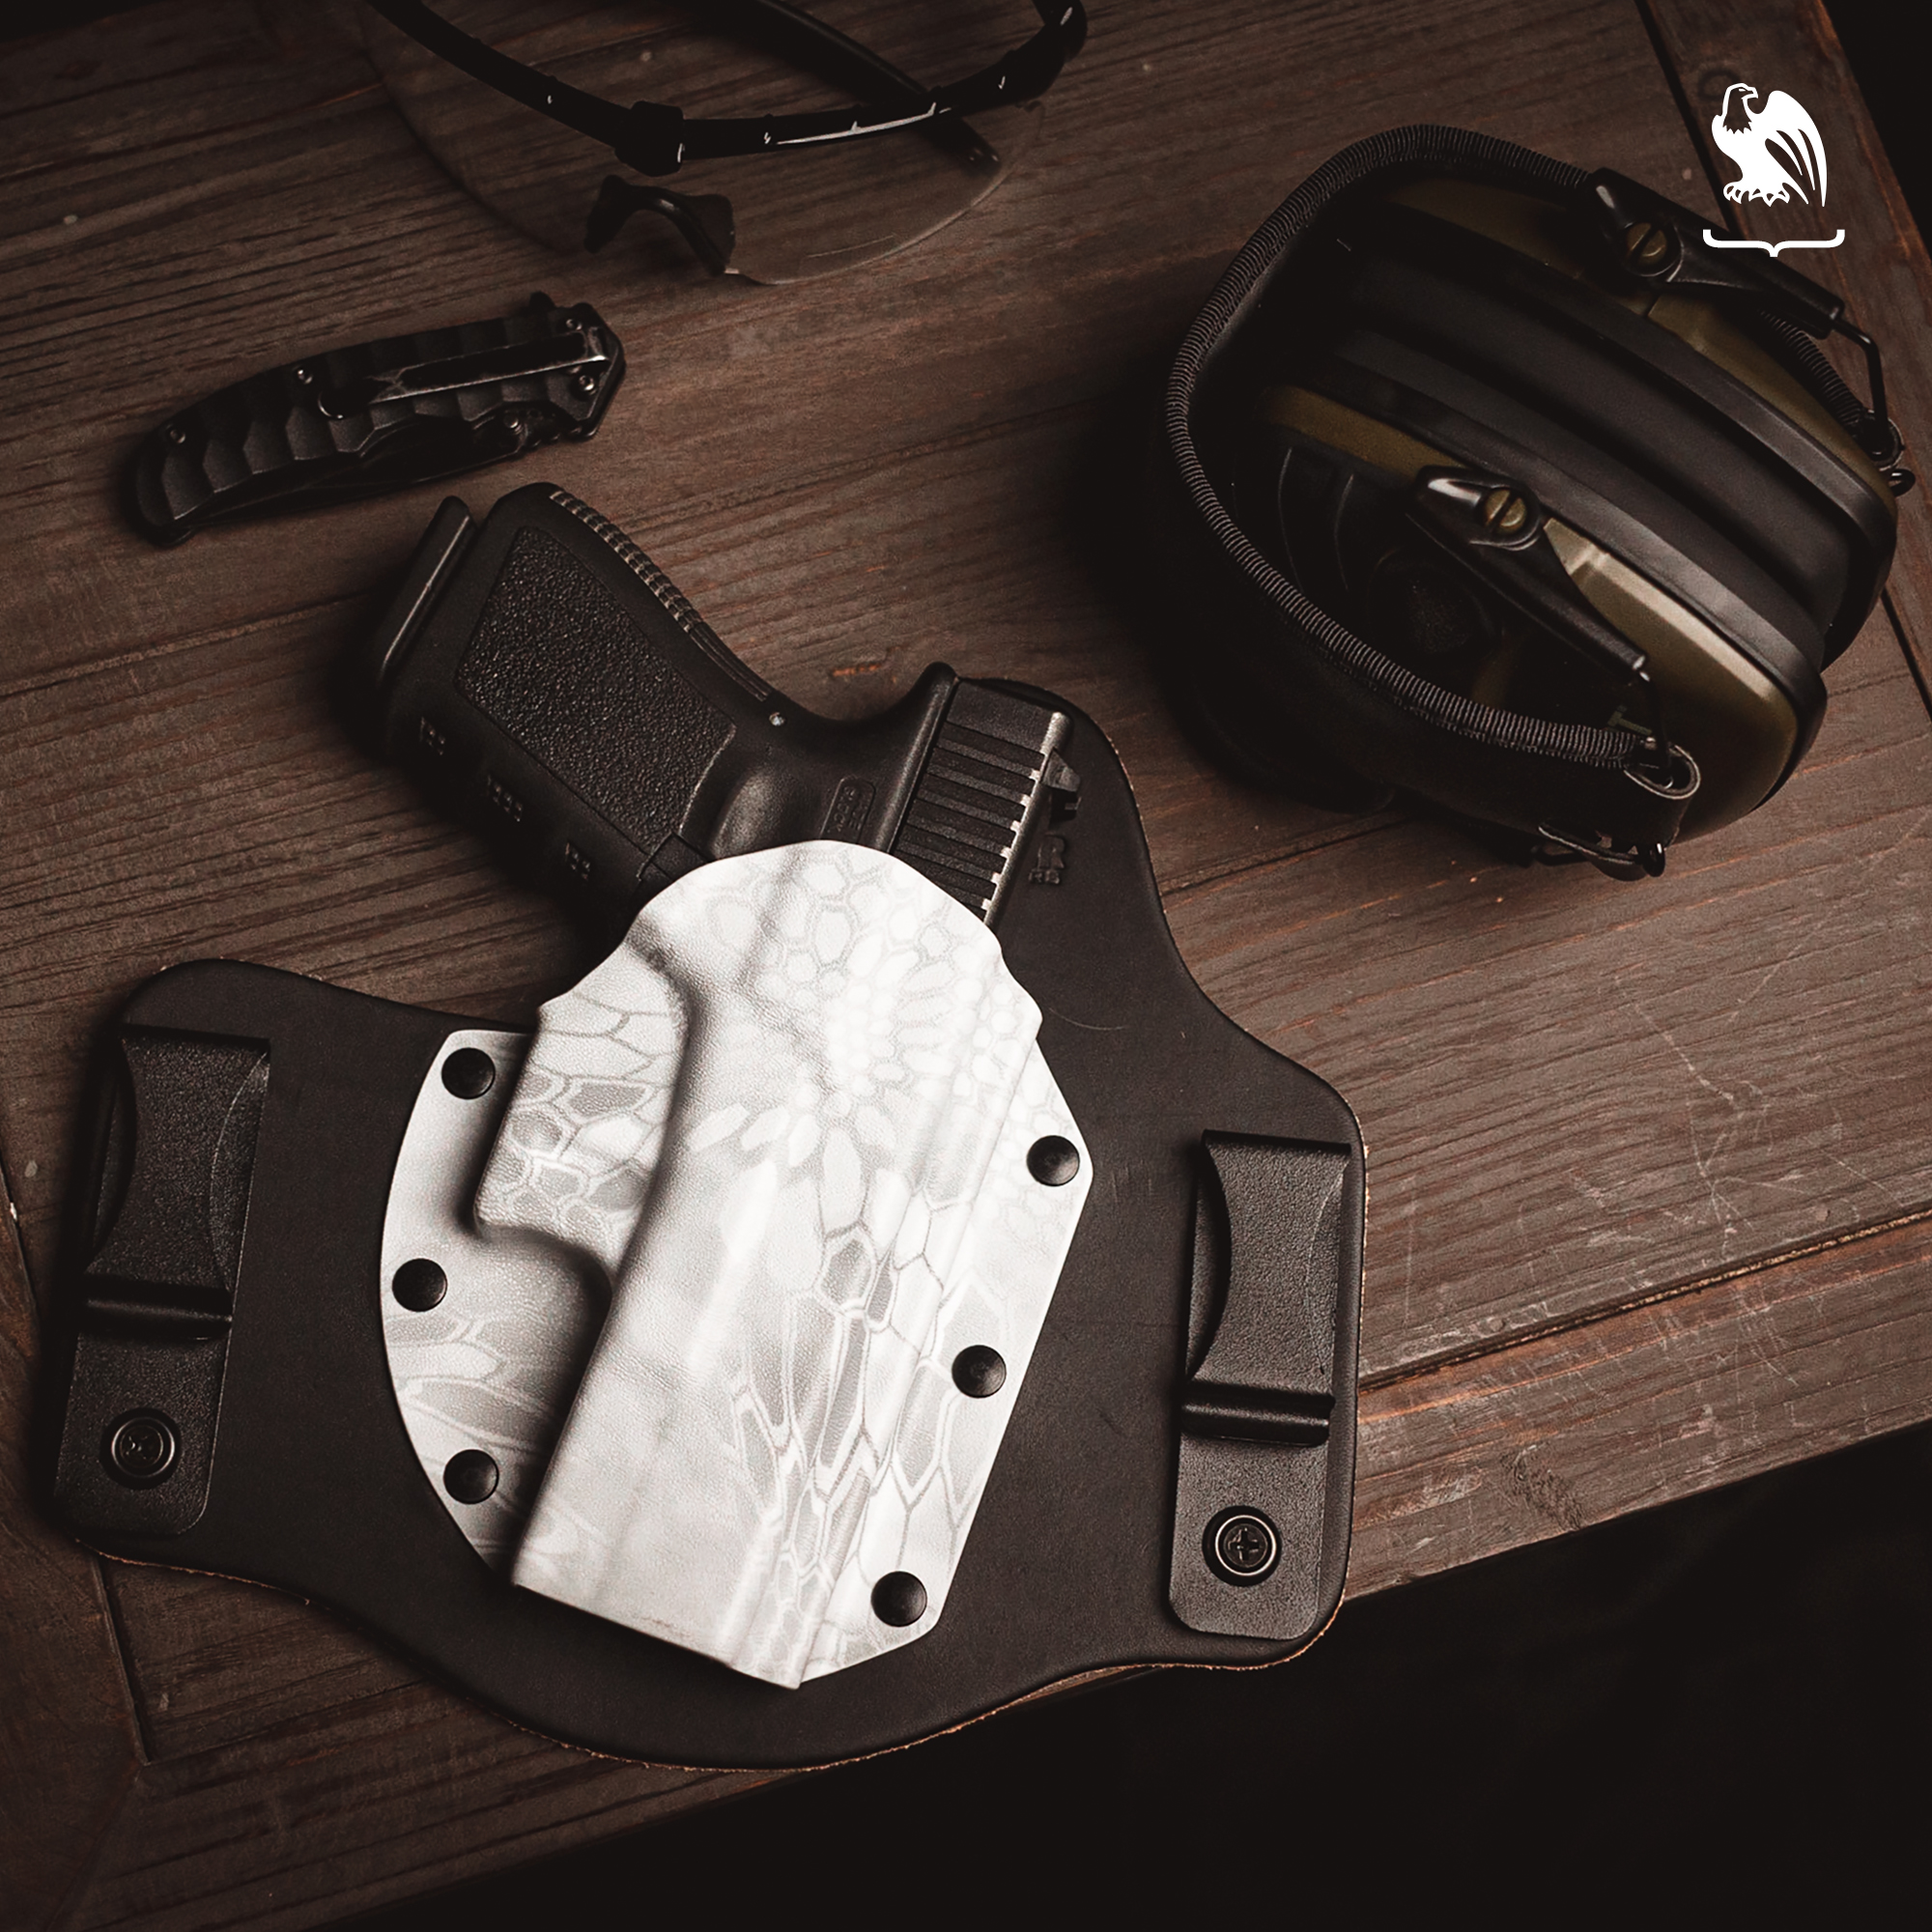 Items to bring - Vedder Holster, handgun, shooting ear protection, tactical knife and shooting protective glasses